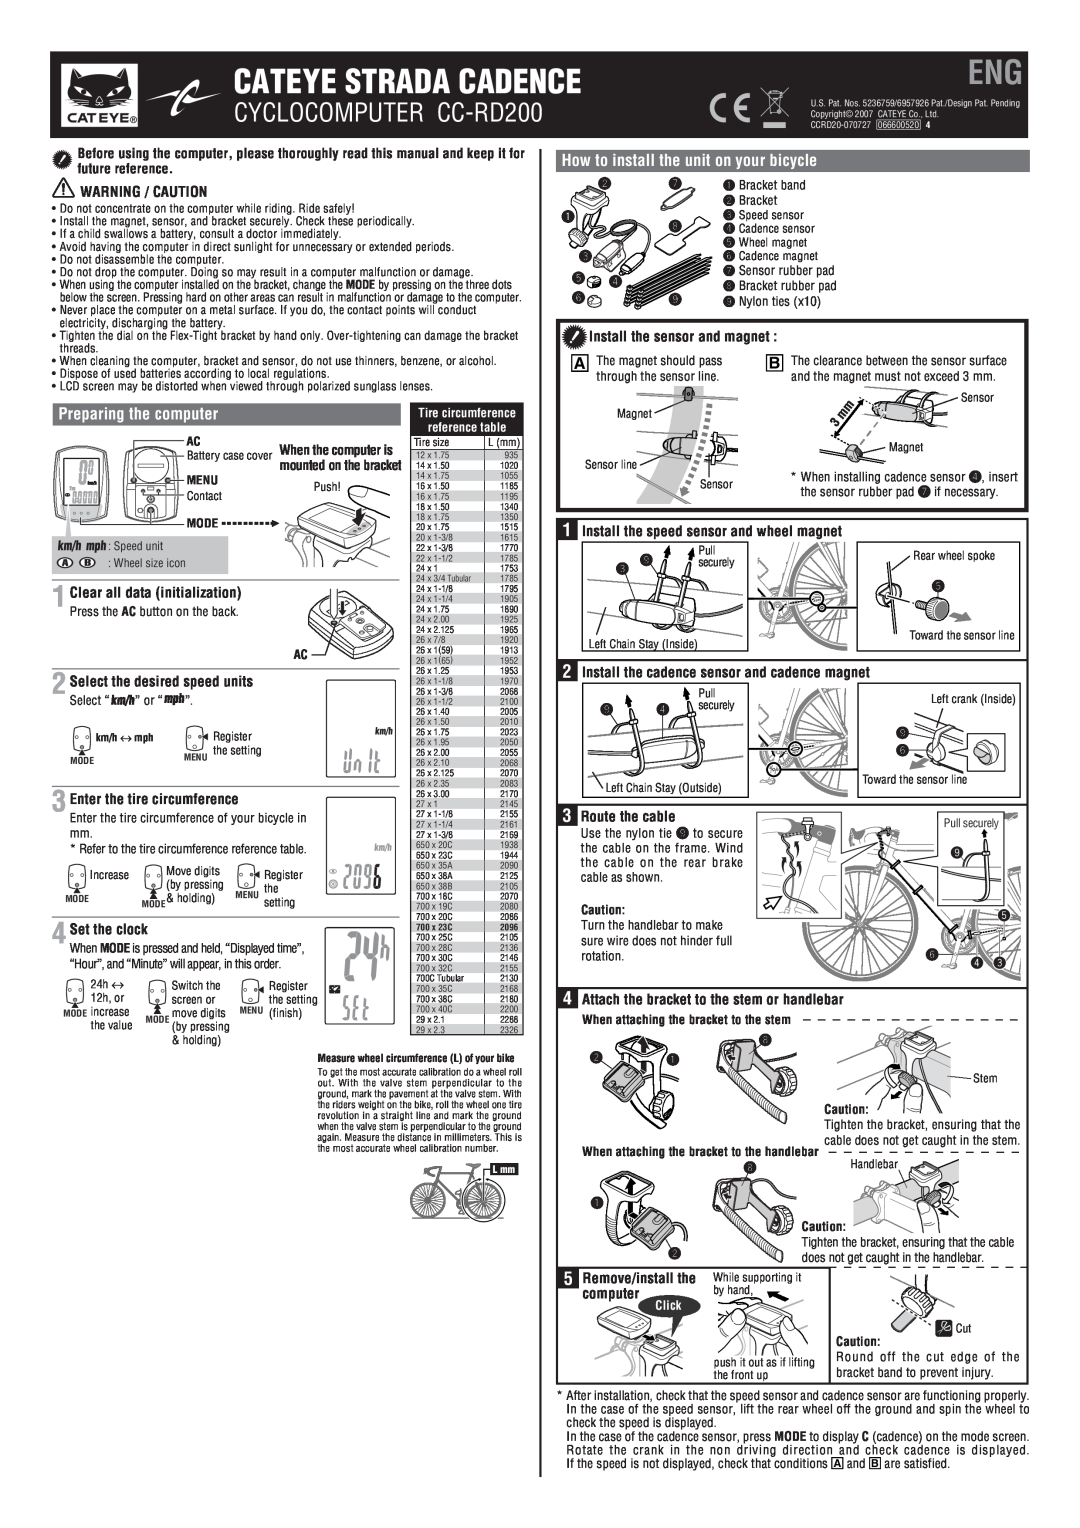 Cateye CC-RD200 manual How to install the unit on your bicycle, Preparing the computer, Warning / Caution, Set the clock 